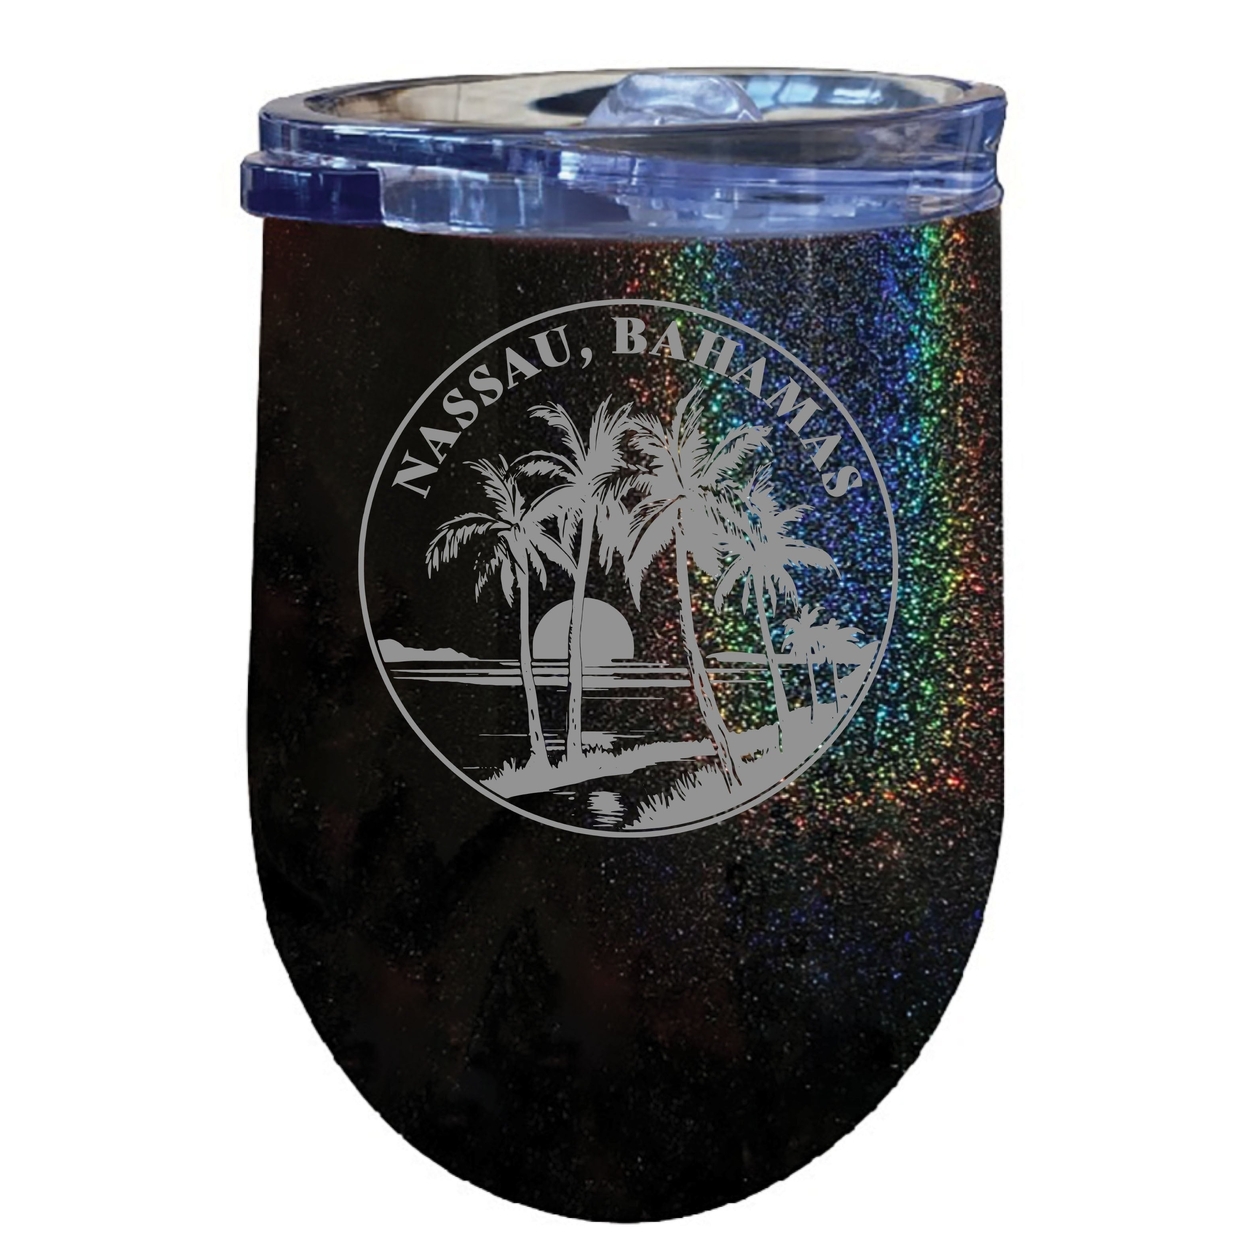 Nassau The Bahamas Souvenir 12 Oz Engraved Insulated Wine Stainless Steel Tumbler - Seafoam,,4-Pack